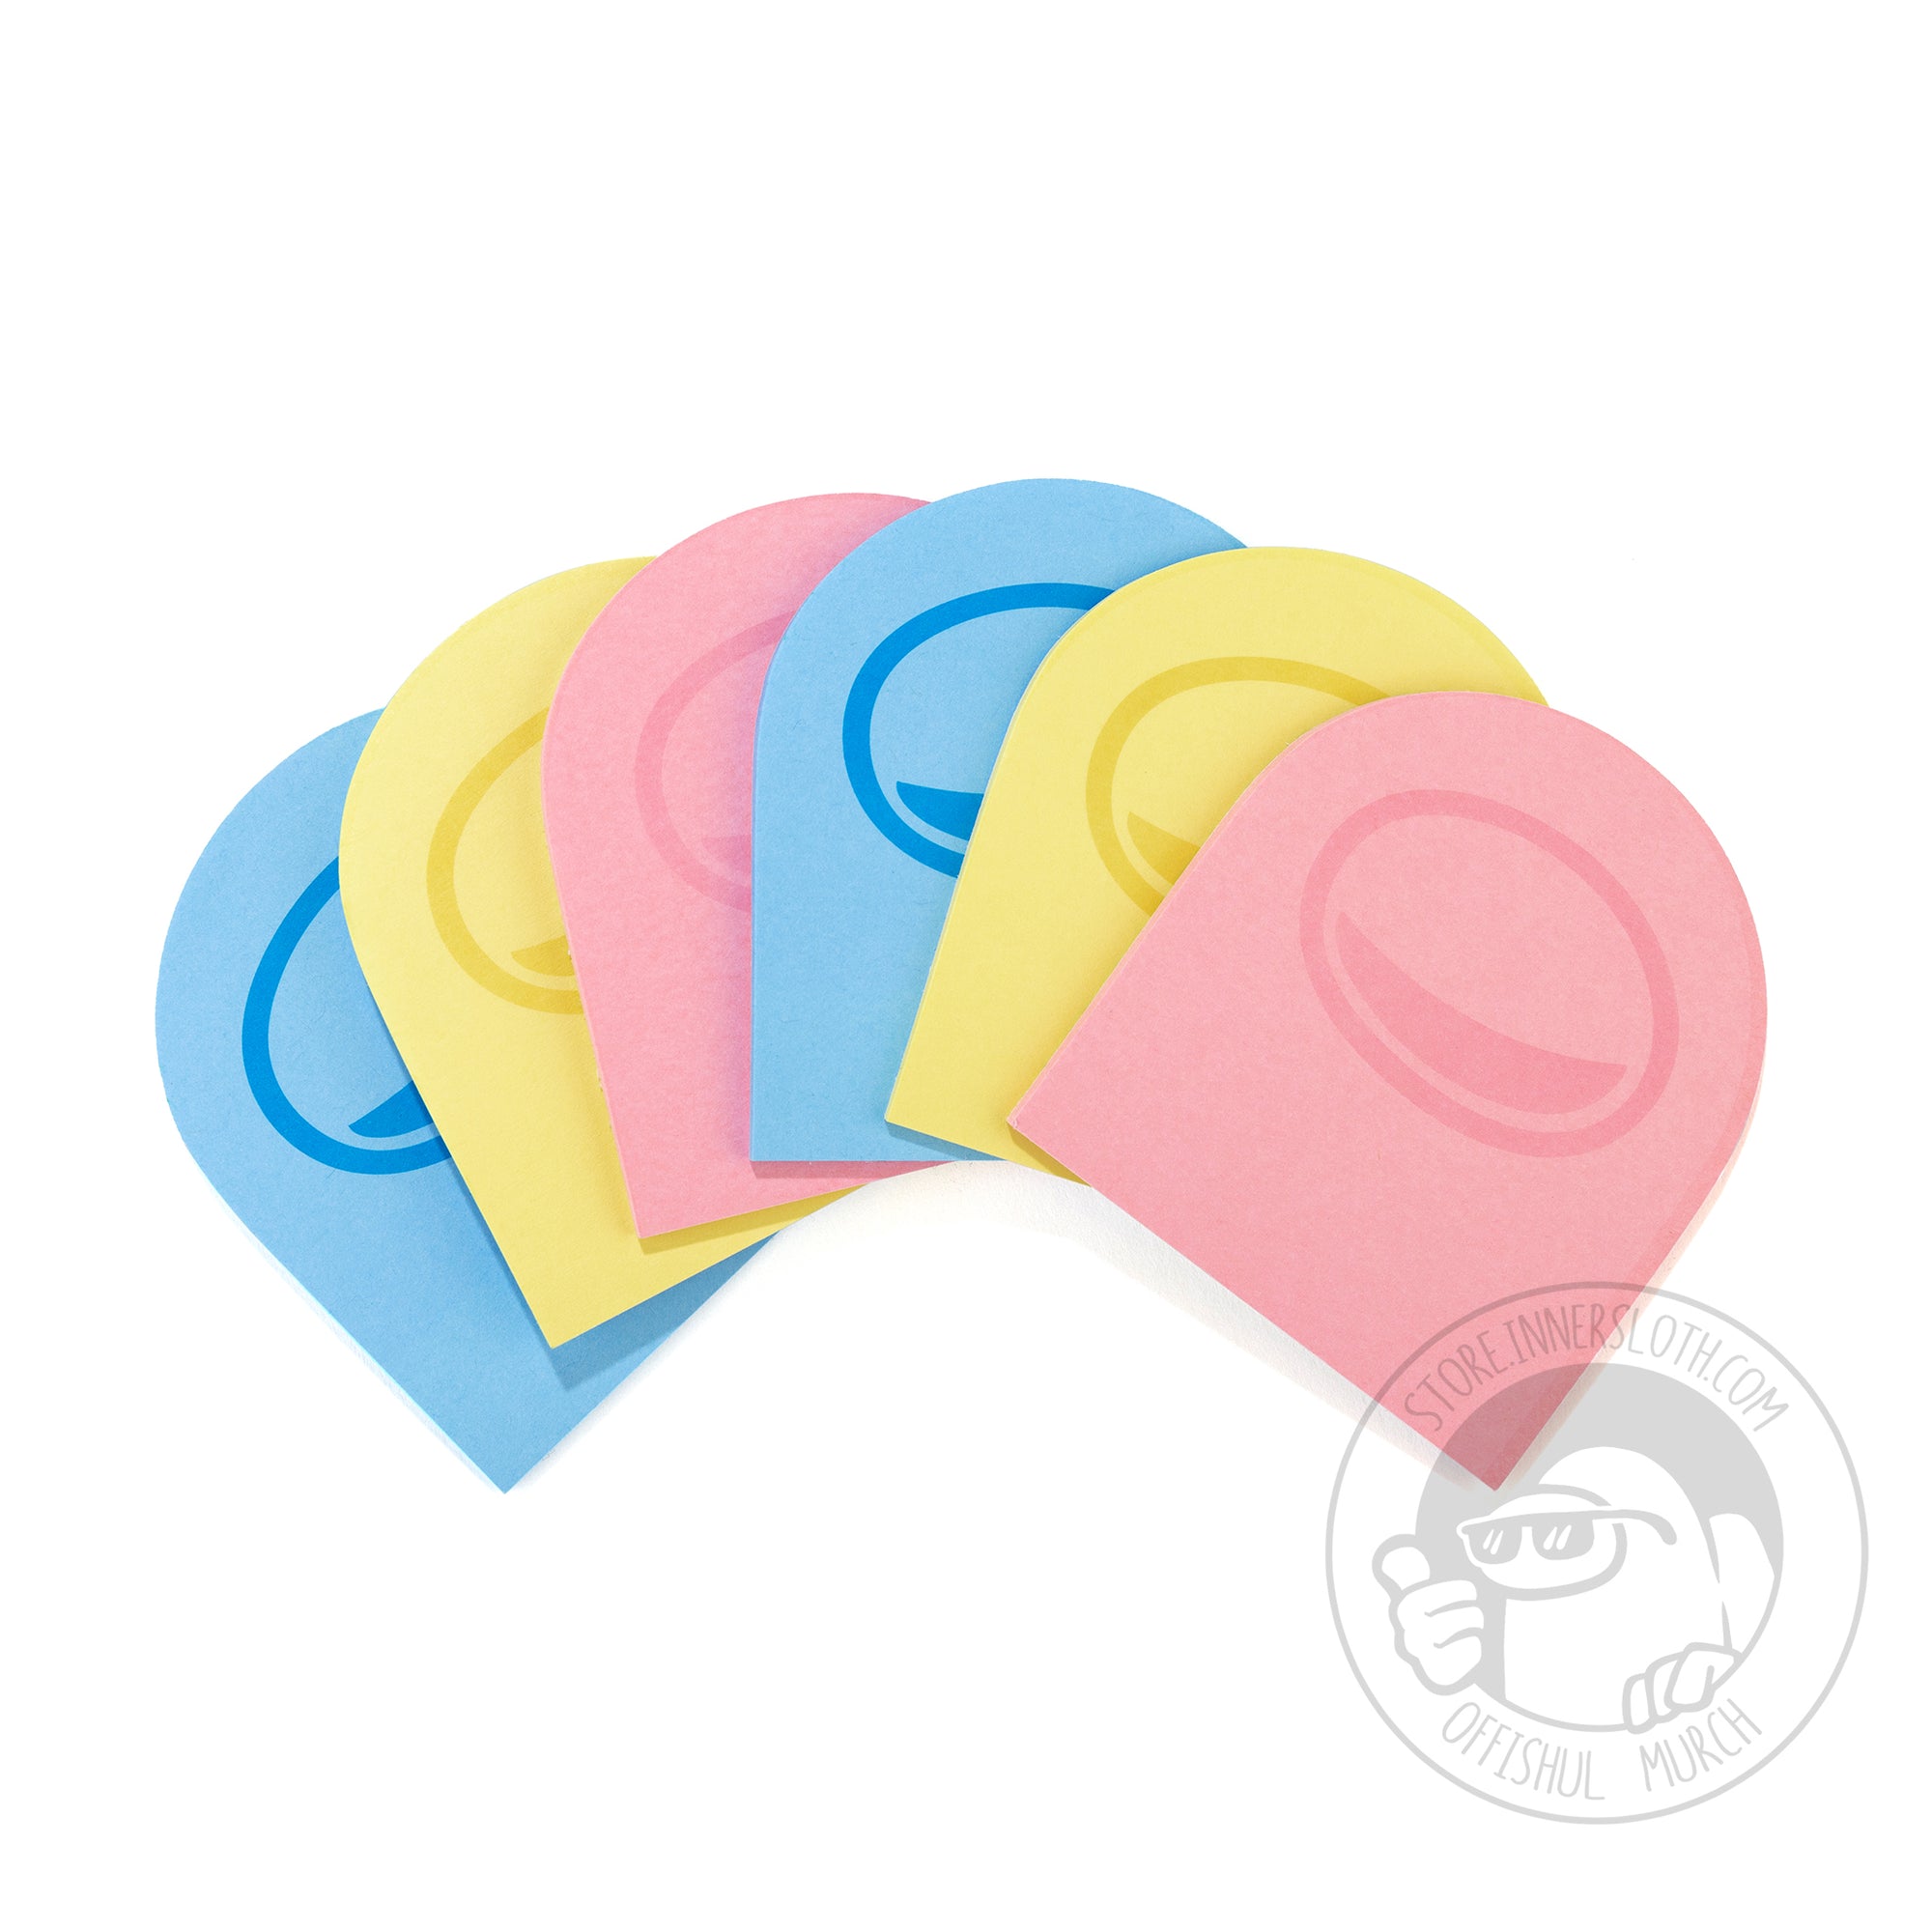 A product photo of six packs of Post-It notes, shaped like crewmate heads. Two of each of the Post-It colors are shown: blue, yellow, and pink. A faded visor design are printed on all the Post-Its. The Post-It notes are spread across a surface in an arc like a deck of cards.